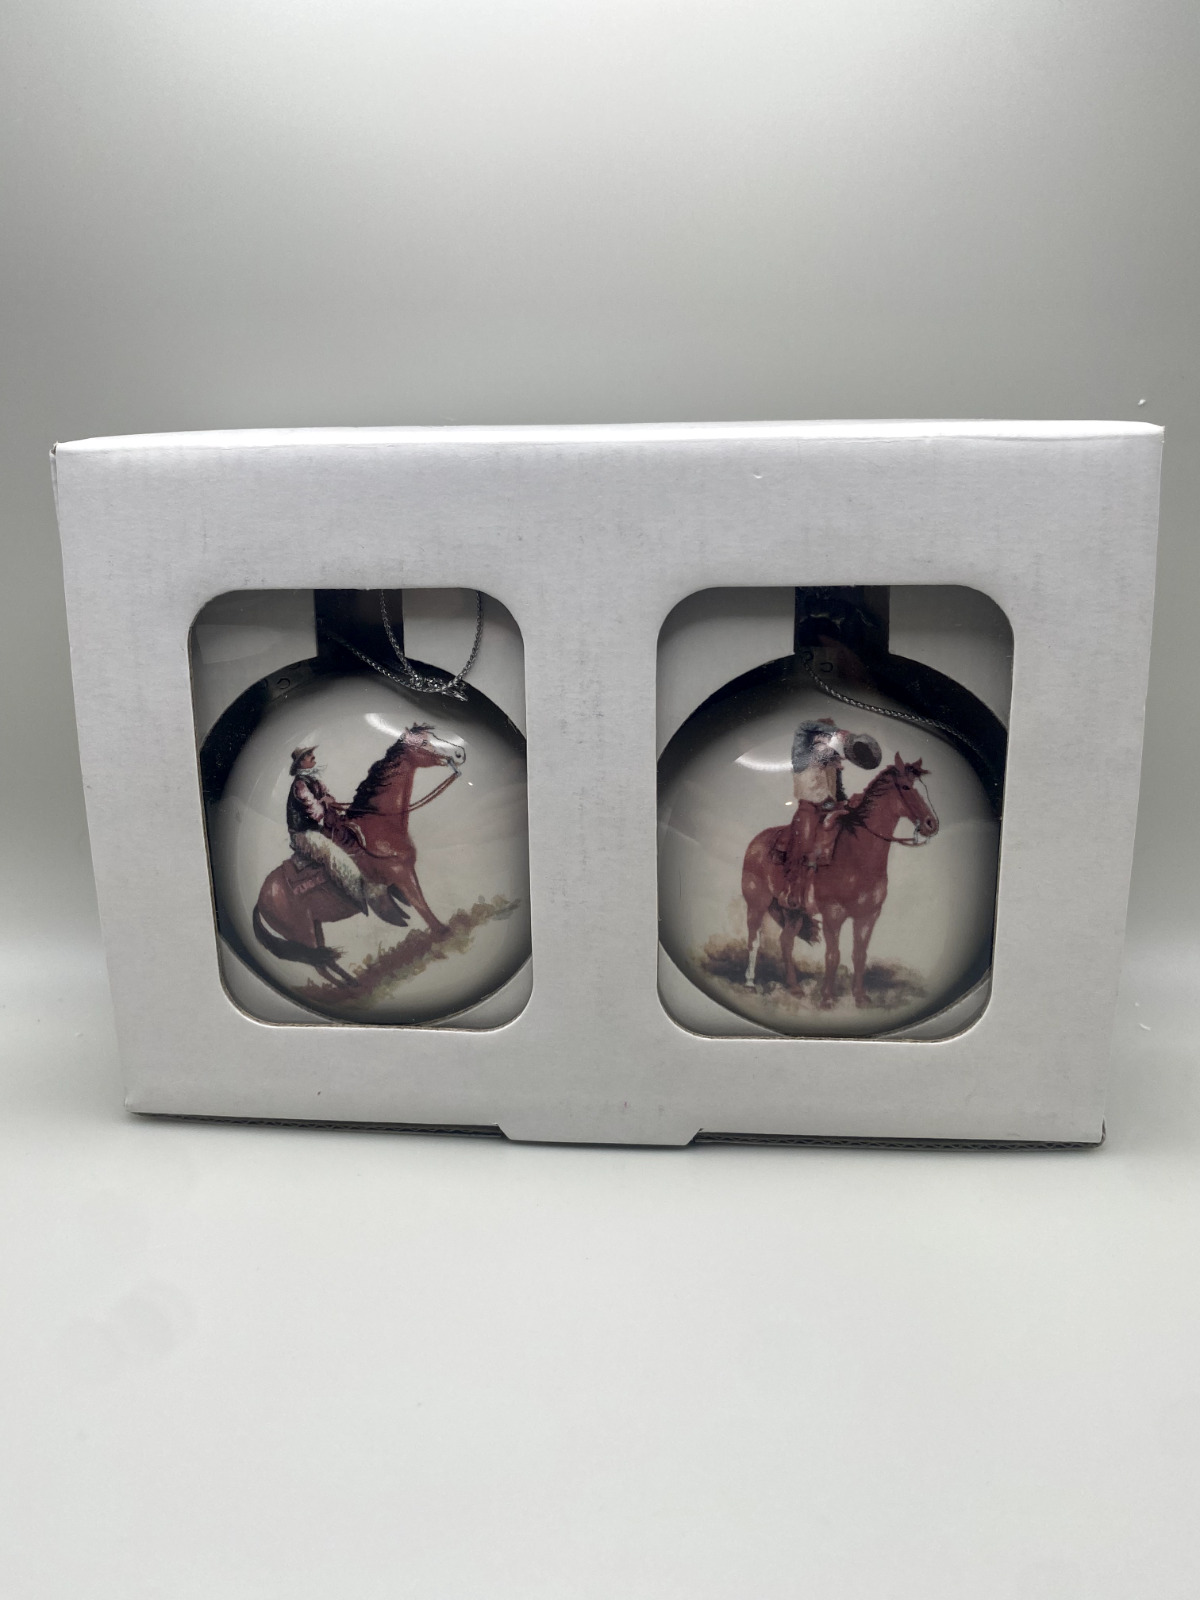 2 Montana Lifestyles Ceramic Reflections 2 Side Cowboy Horse Western Ornaments